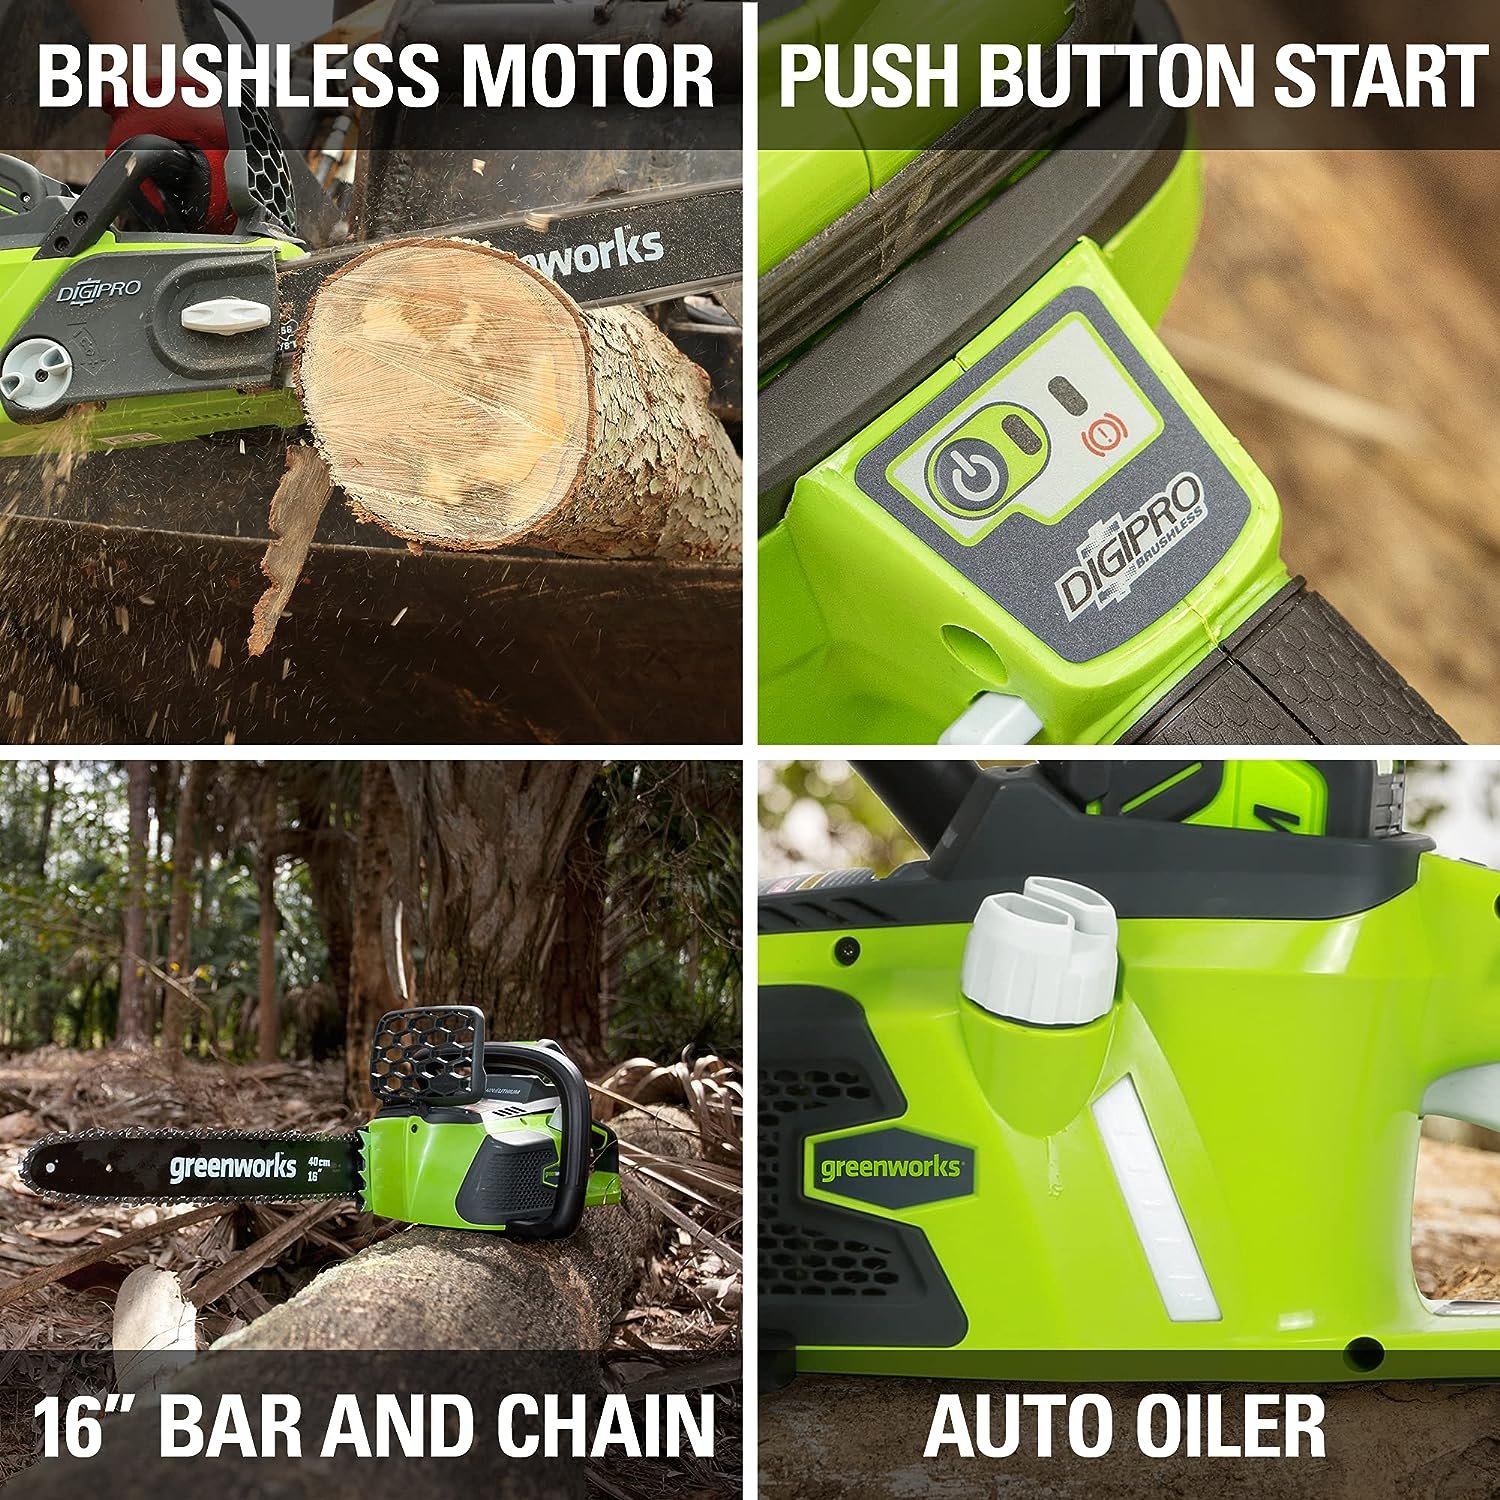 Greenworks 40V Chainsaw Review